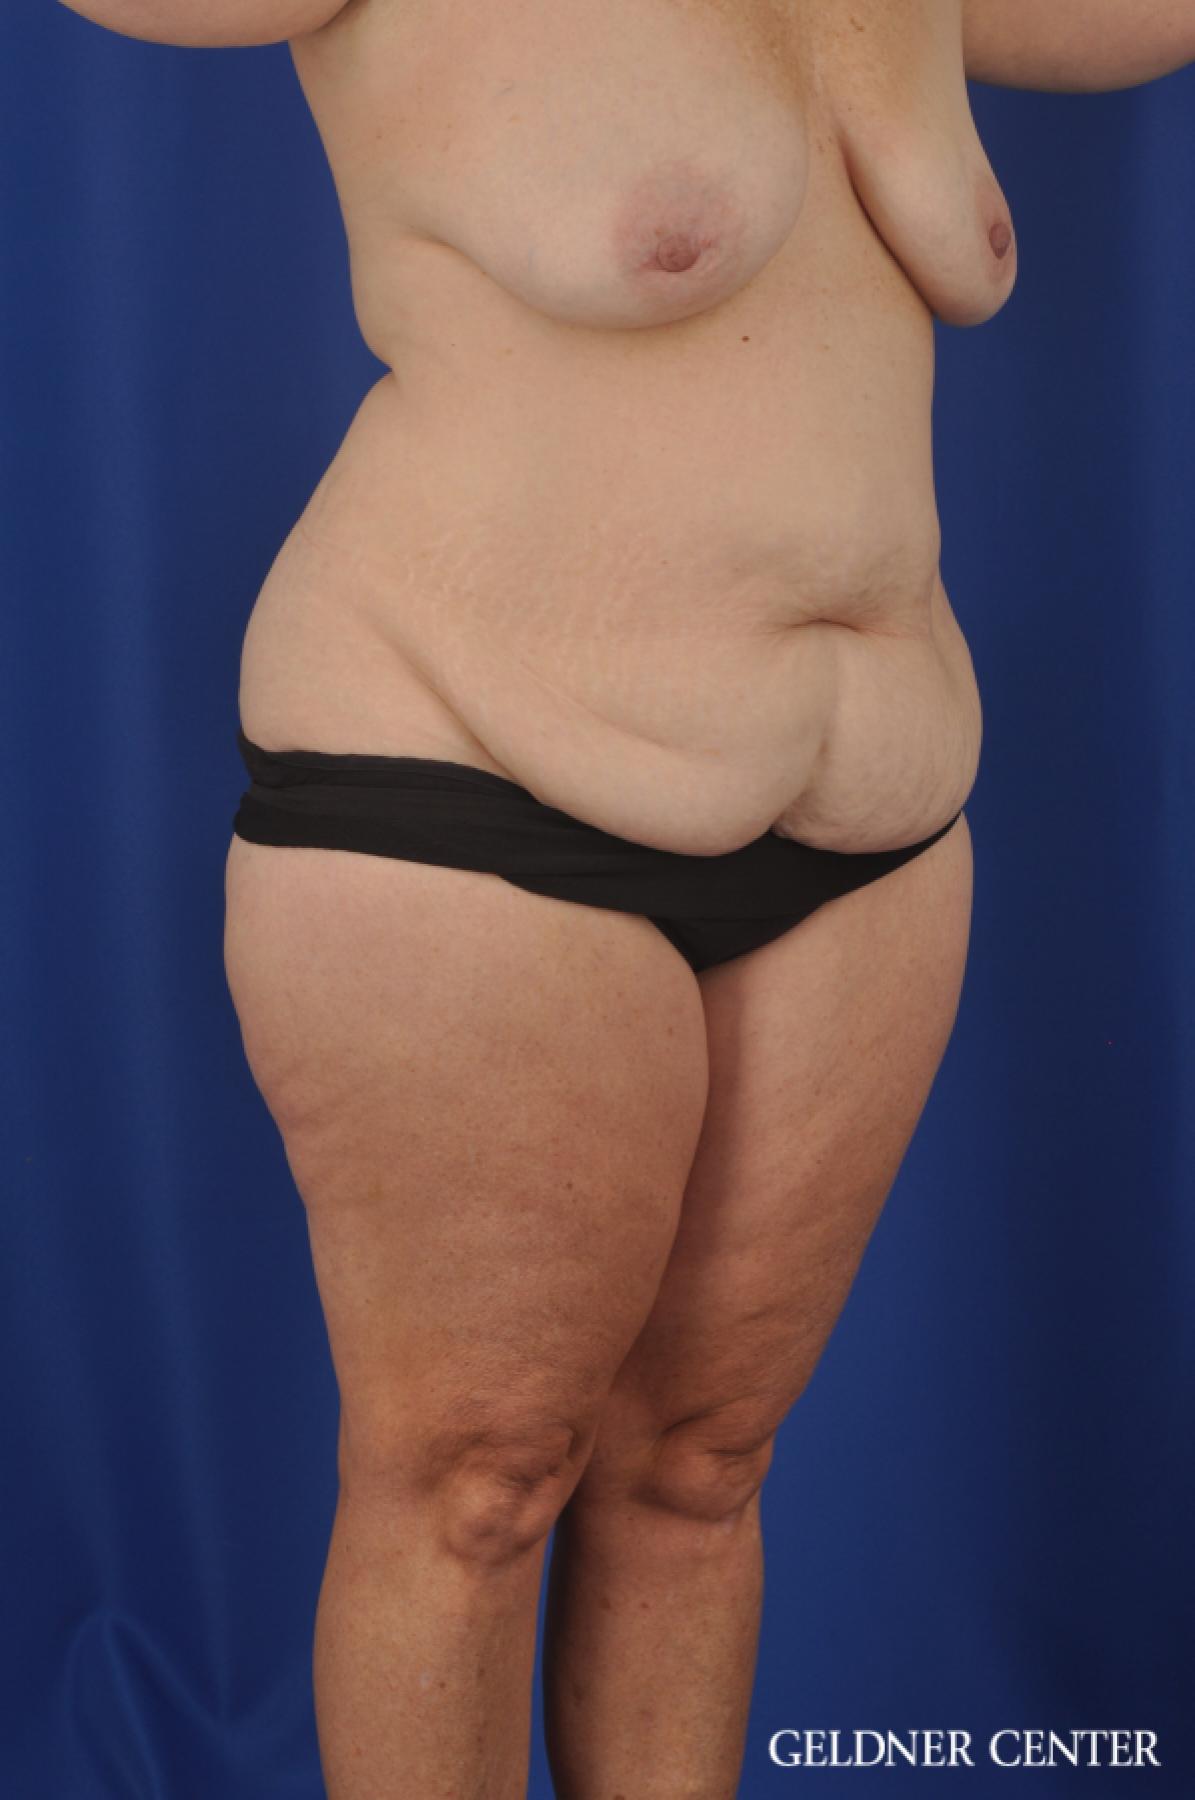 Abdominoplasty Patient 1 before and after photos - Before 2